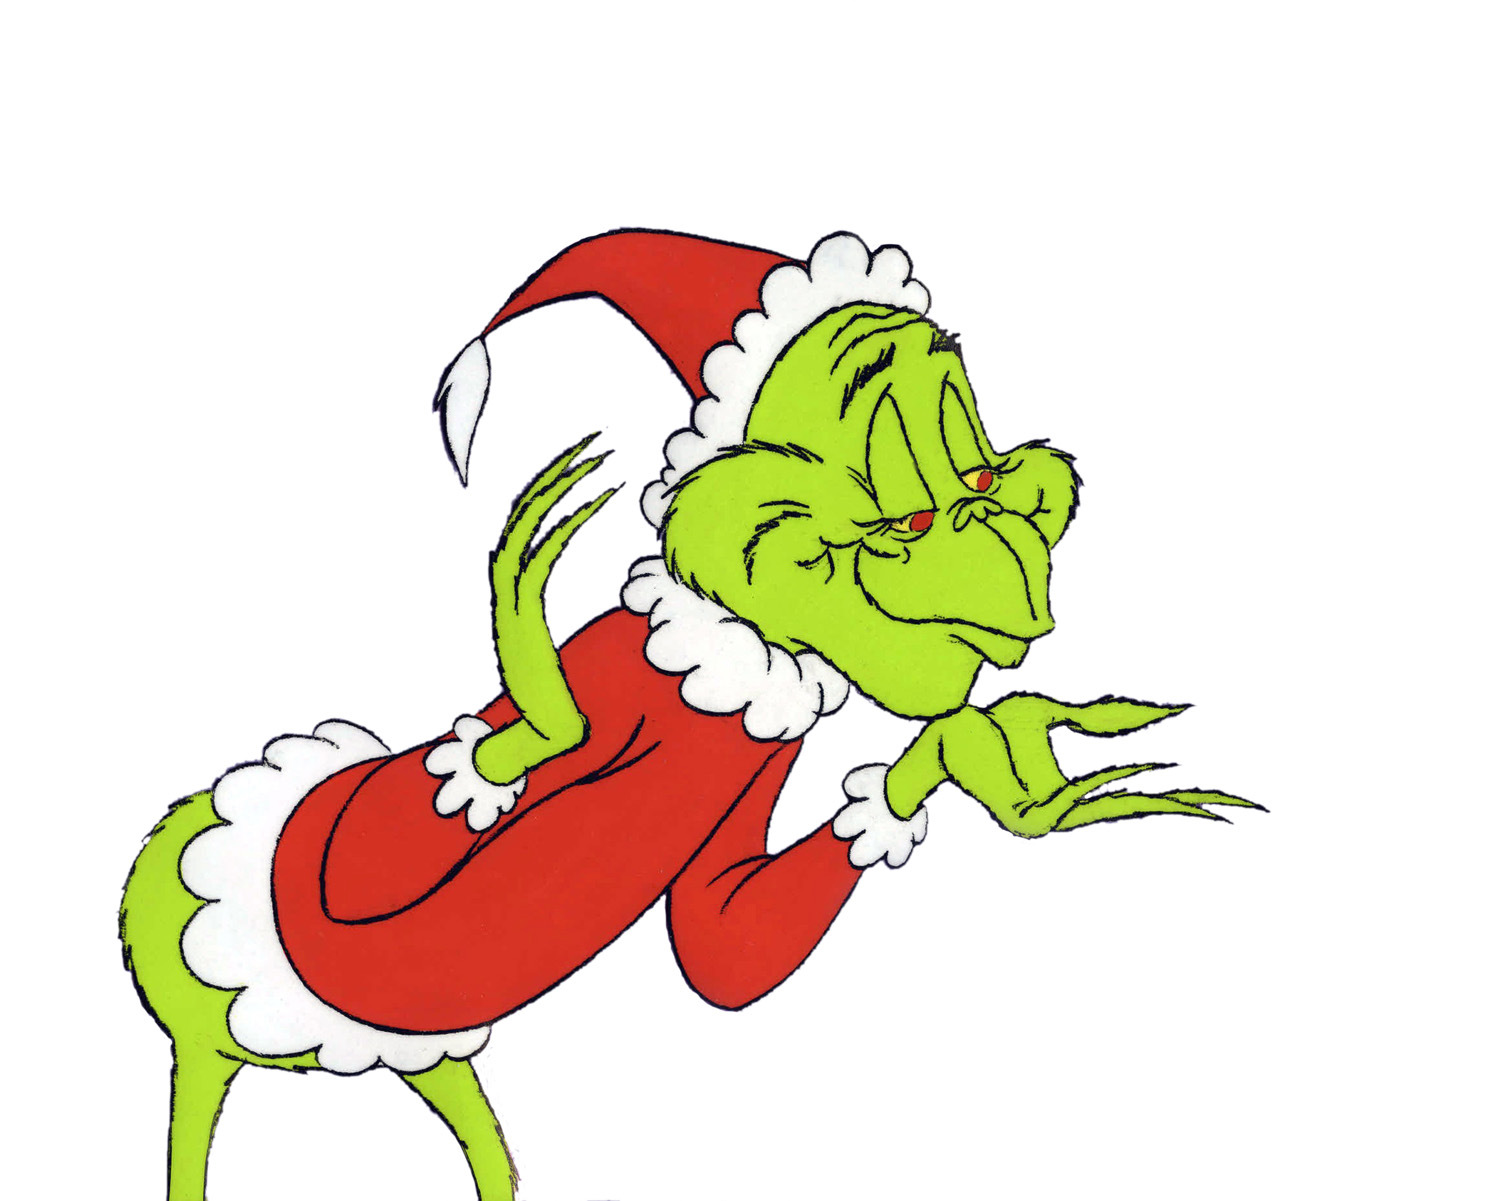 Just plain stupid the grinch 